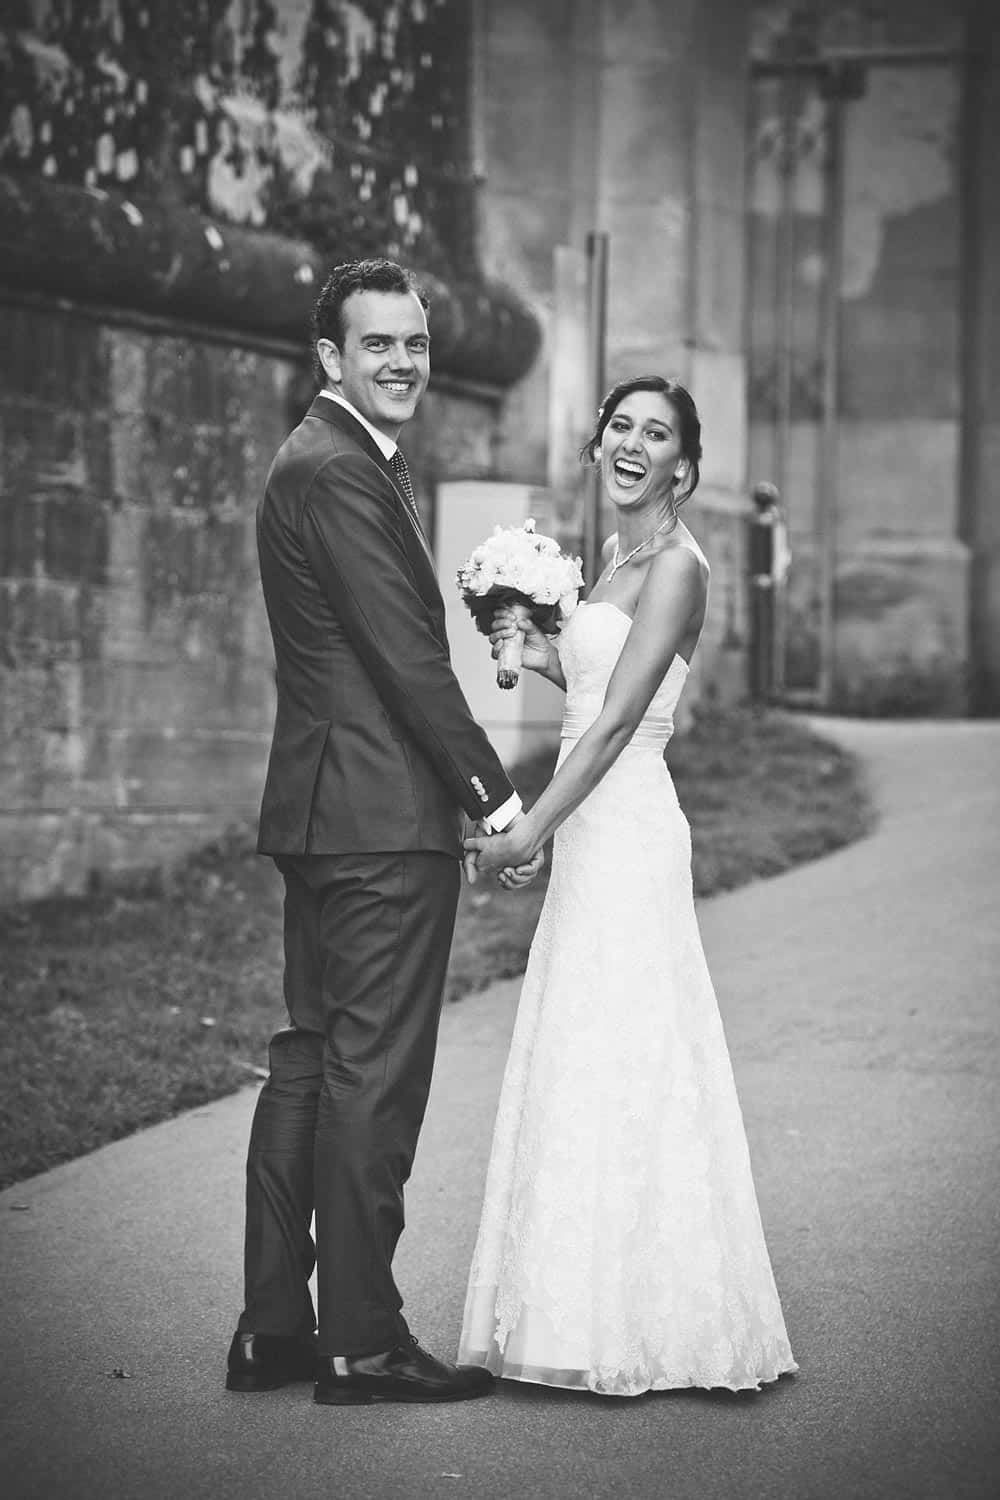 Black and white photo of a couple smiling on their wedding day.